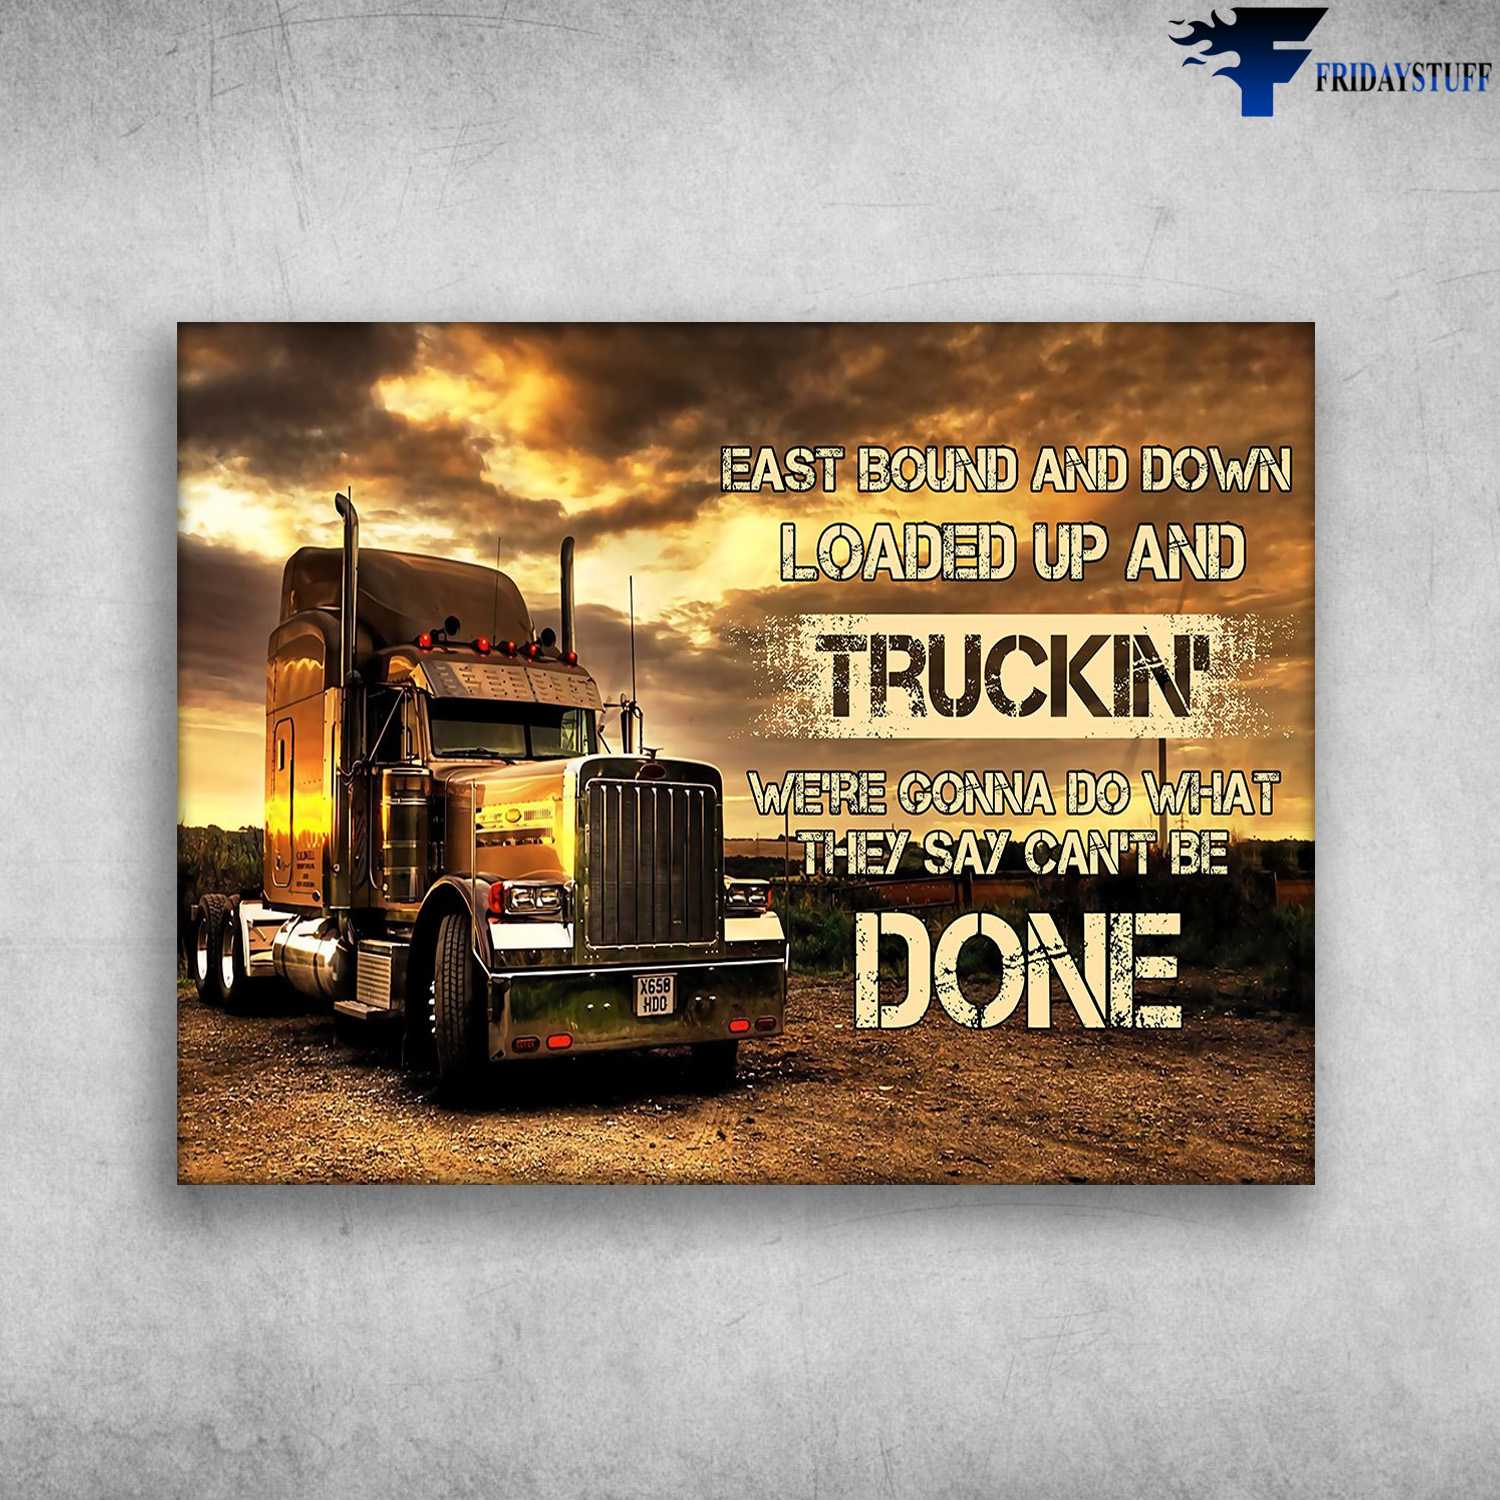 Trucker Poster, Truck Driver - East Boun And Down, Loaded Up And Truck, We're Gonna Do What They Say, Can's Be Done